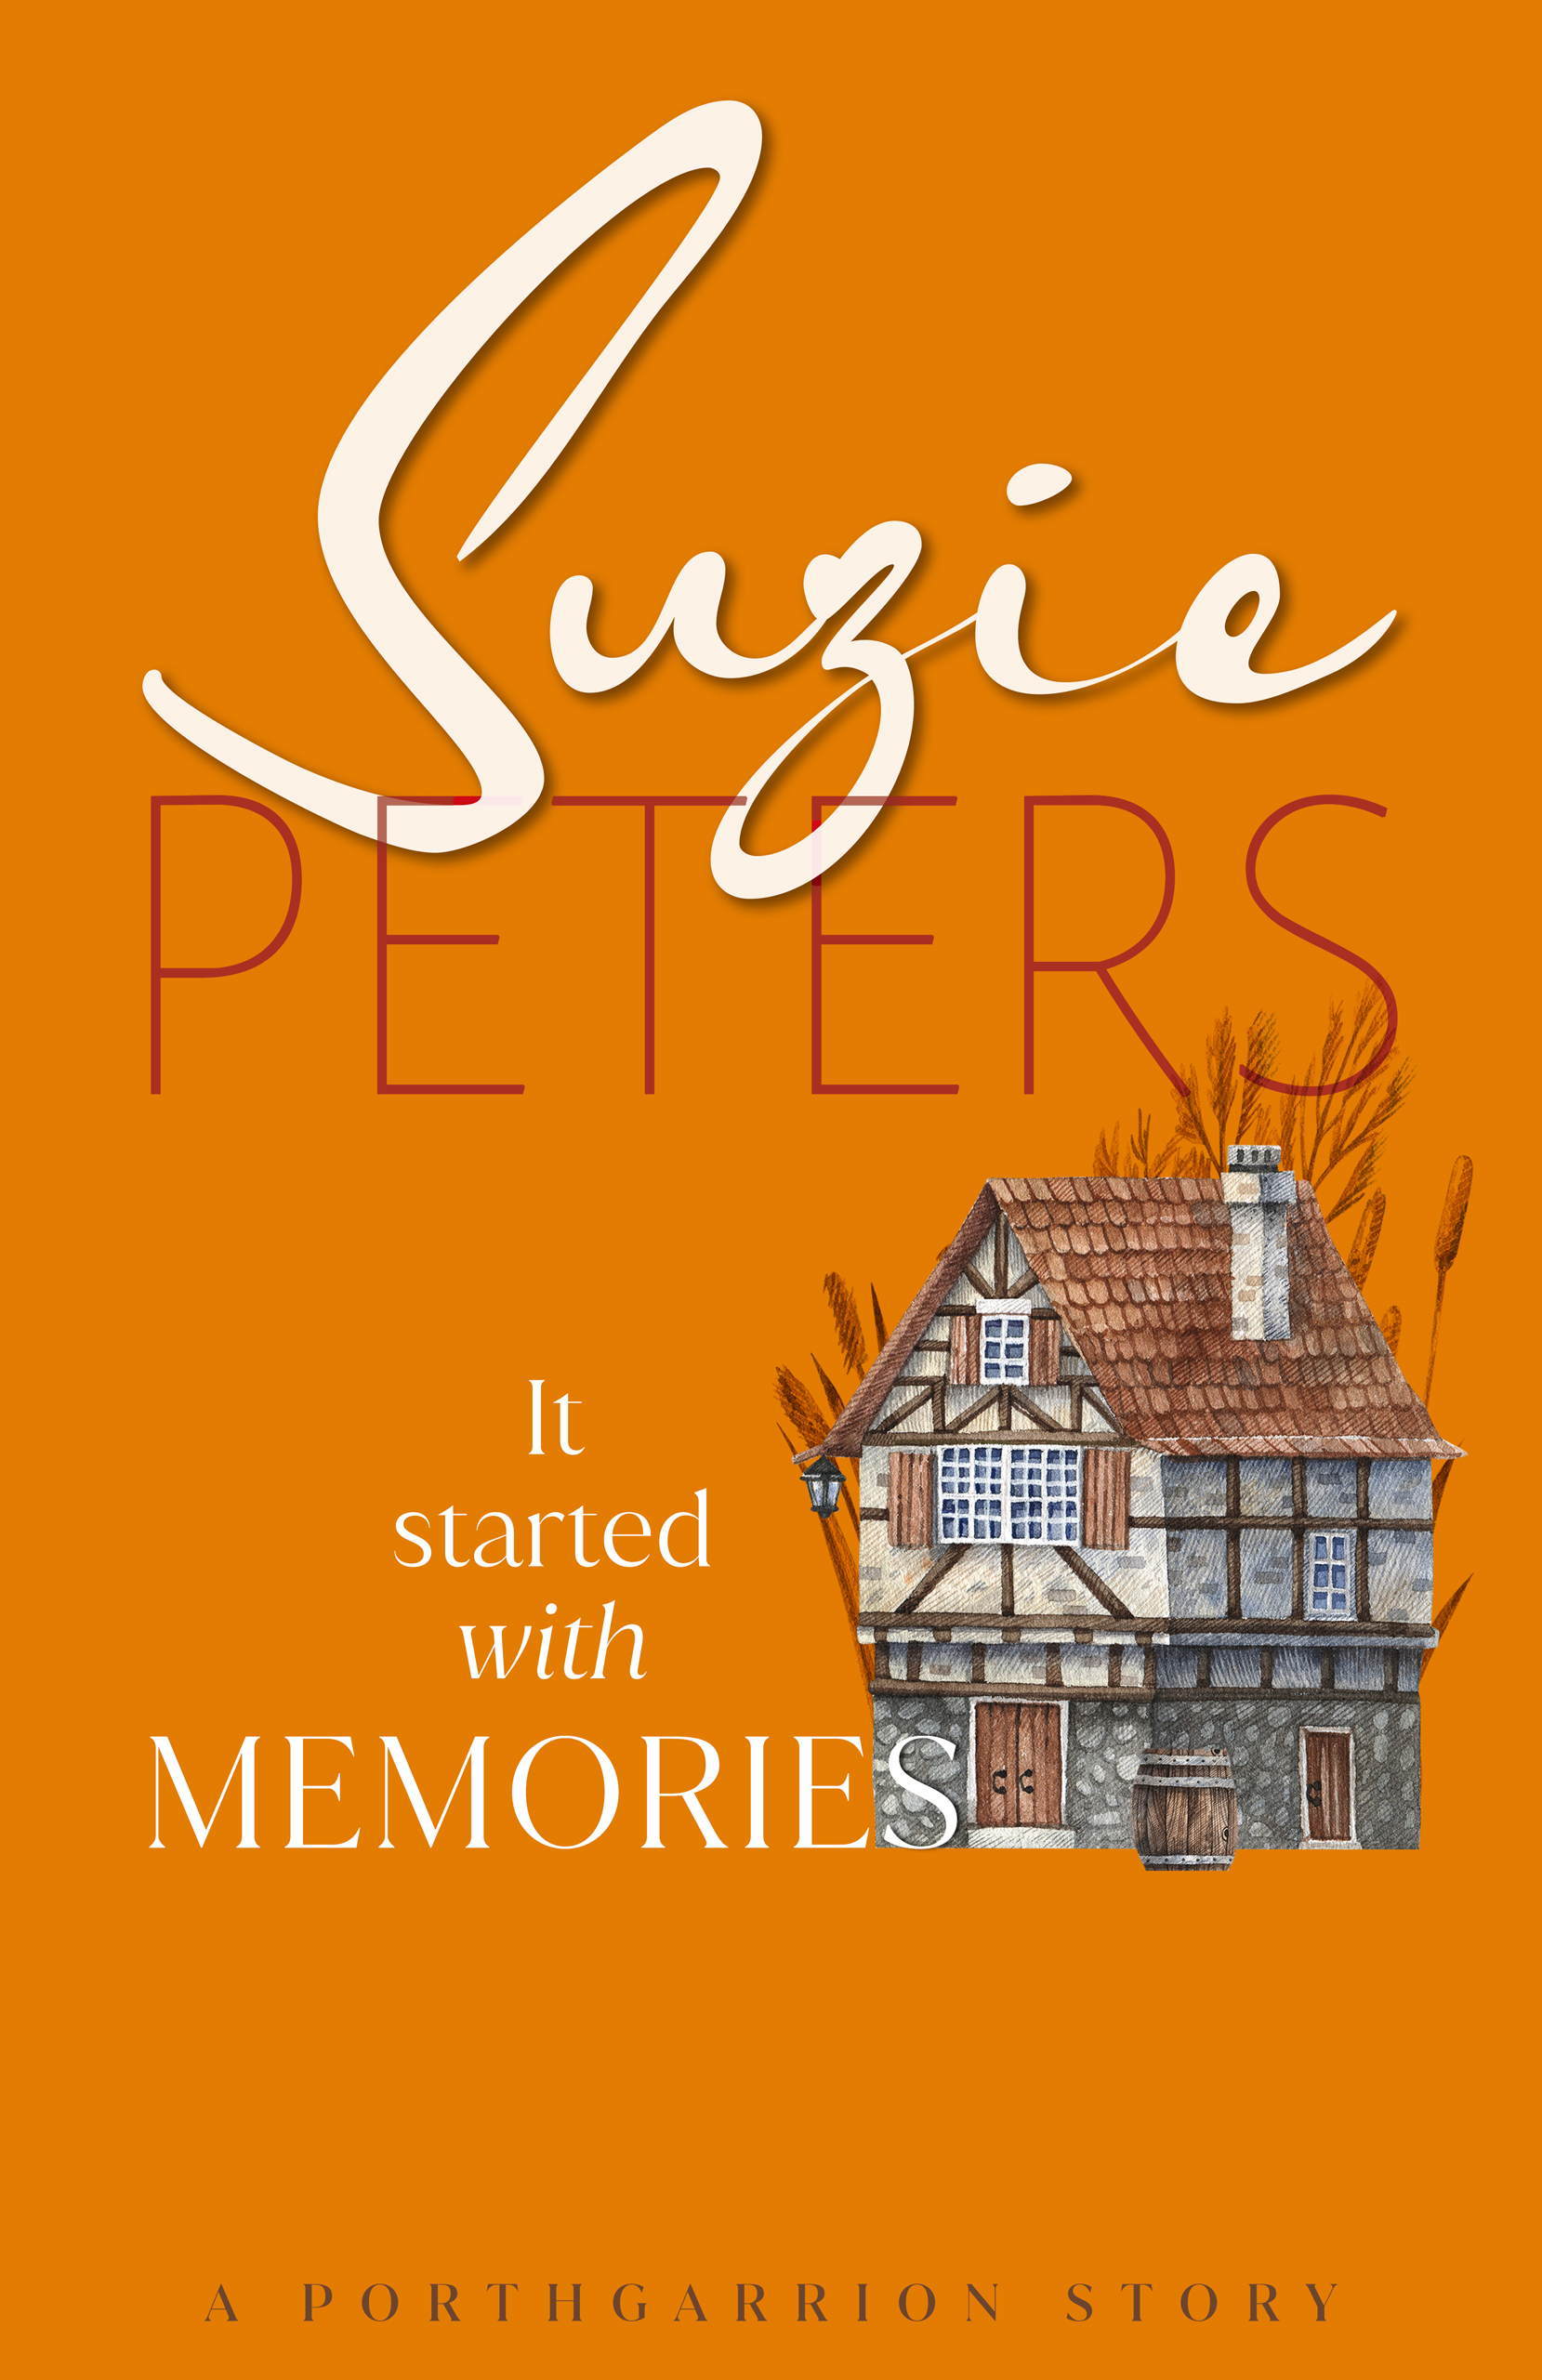 Porthgarrion Series: It Started with Memories by Suzie Peters.